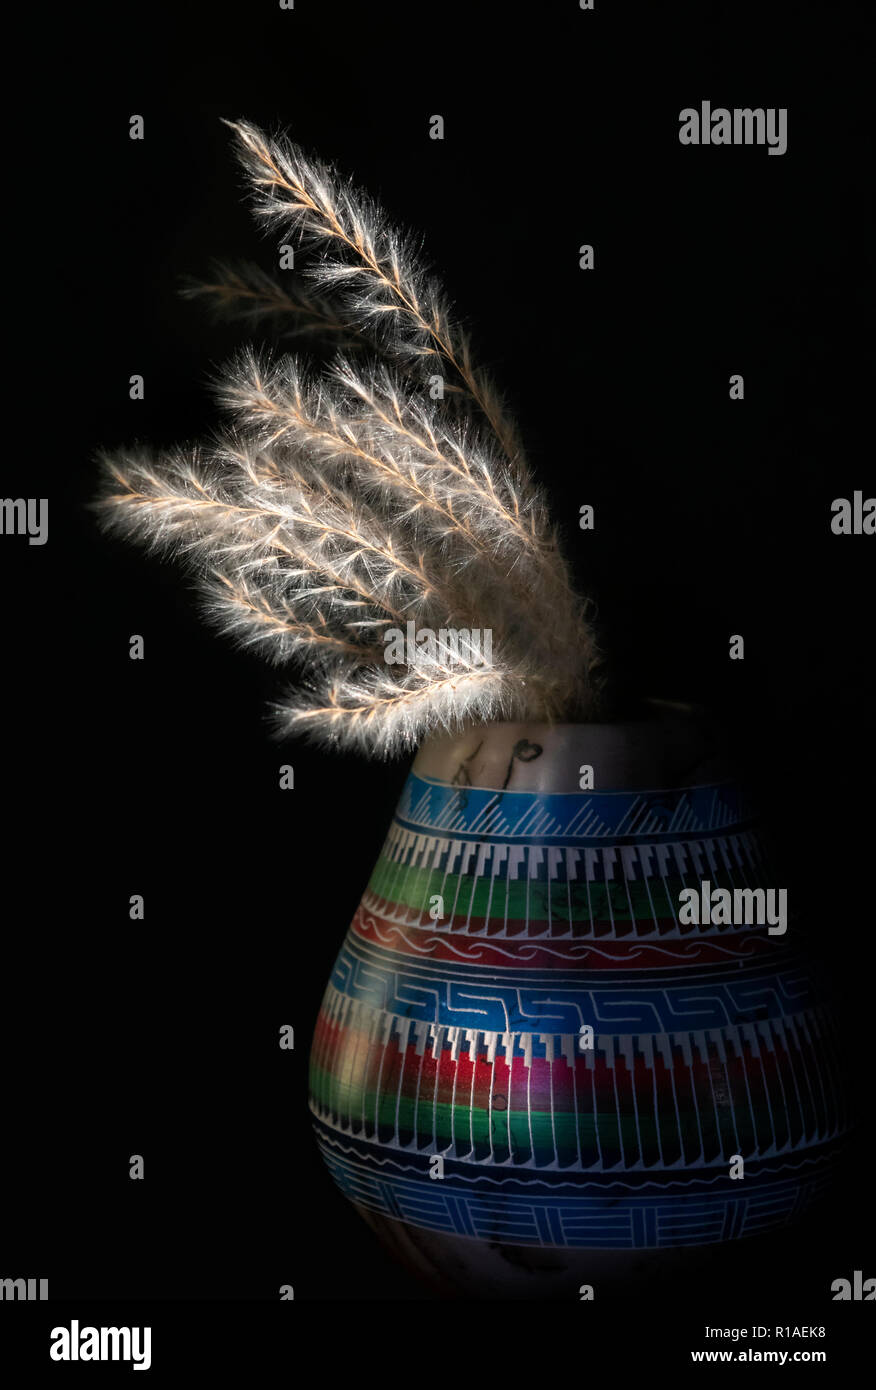 Native American vase (Navajo horse hair pottery) with traditional ornament and a bouquet of dry prairie grass. Stock Photo